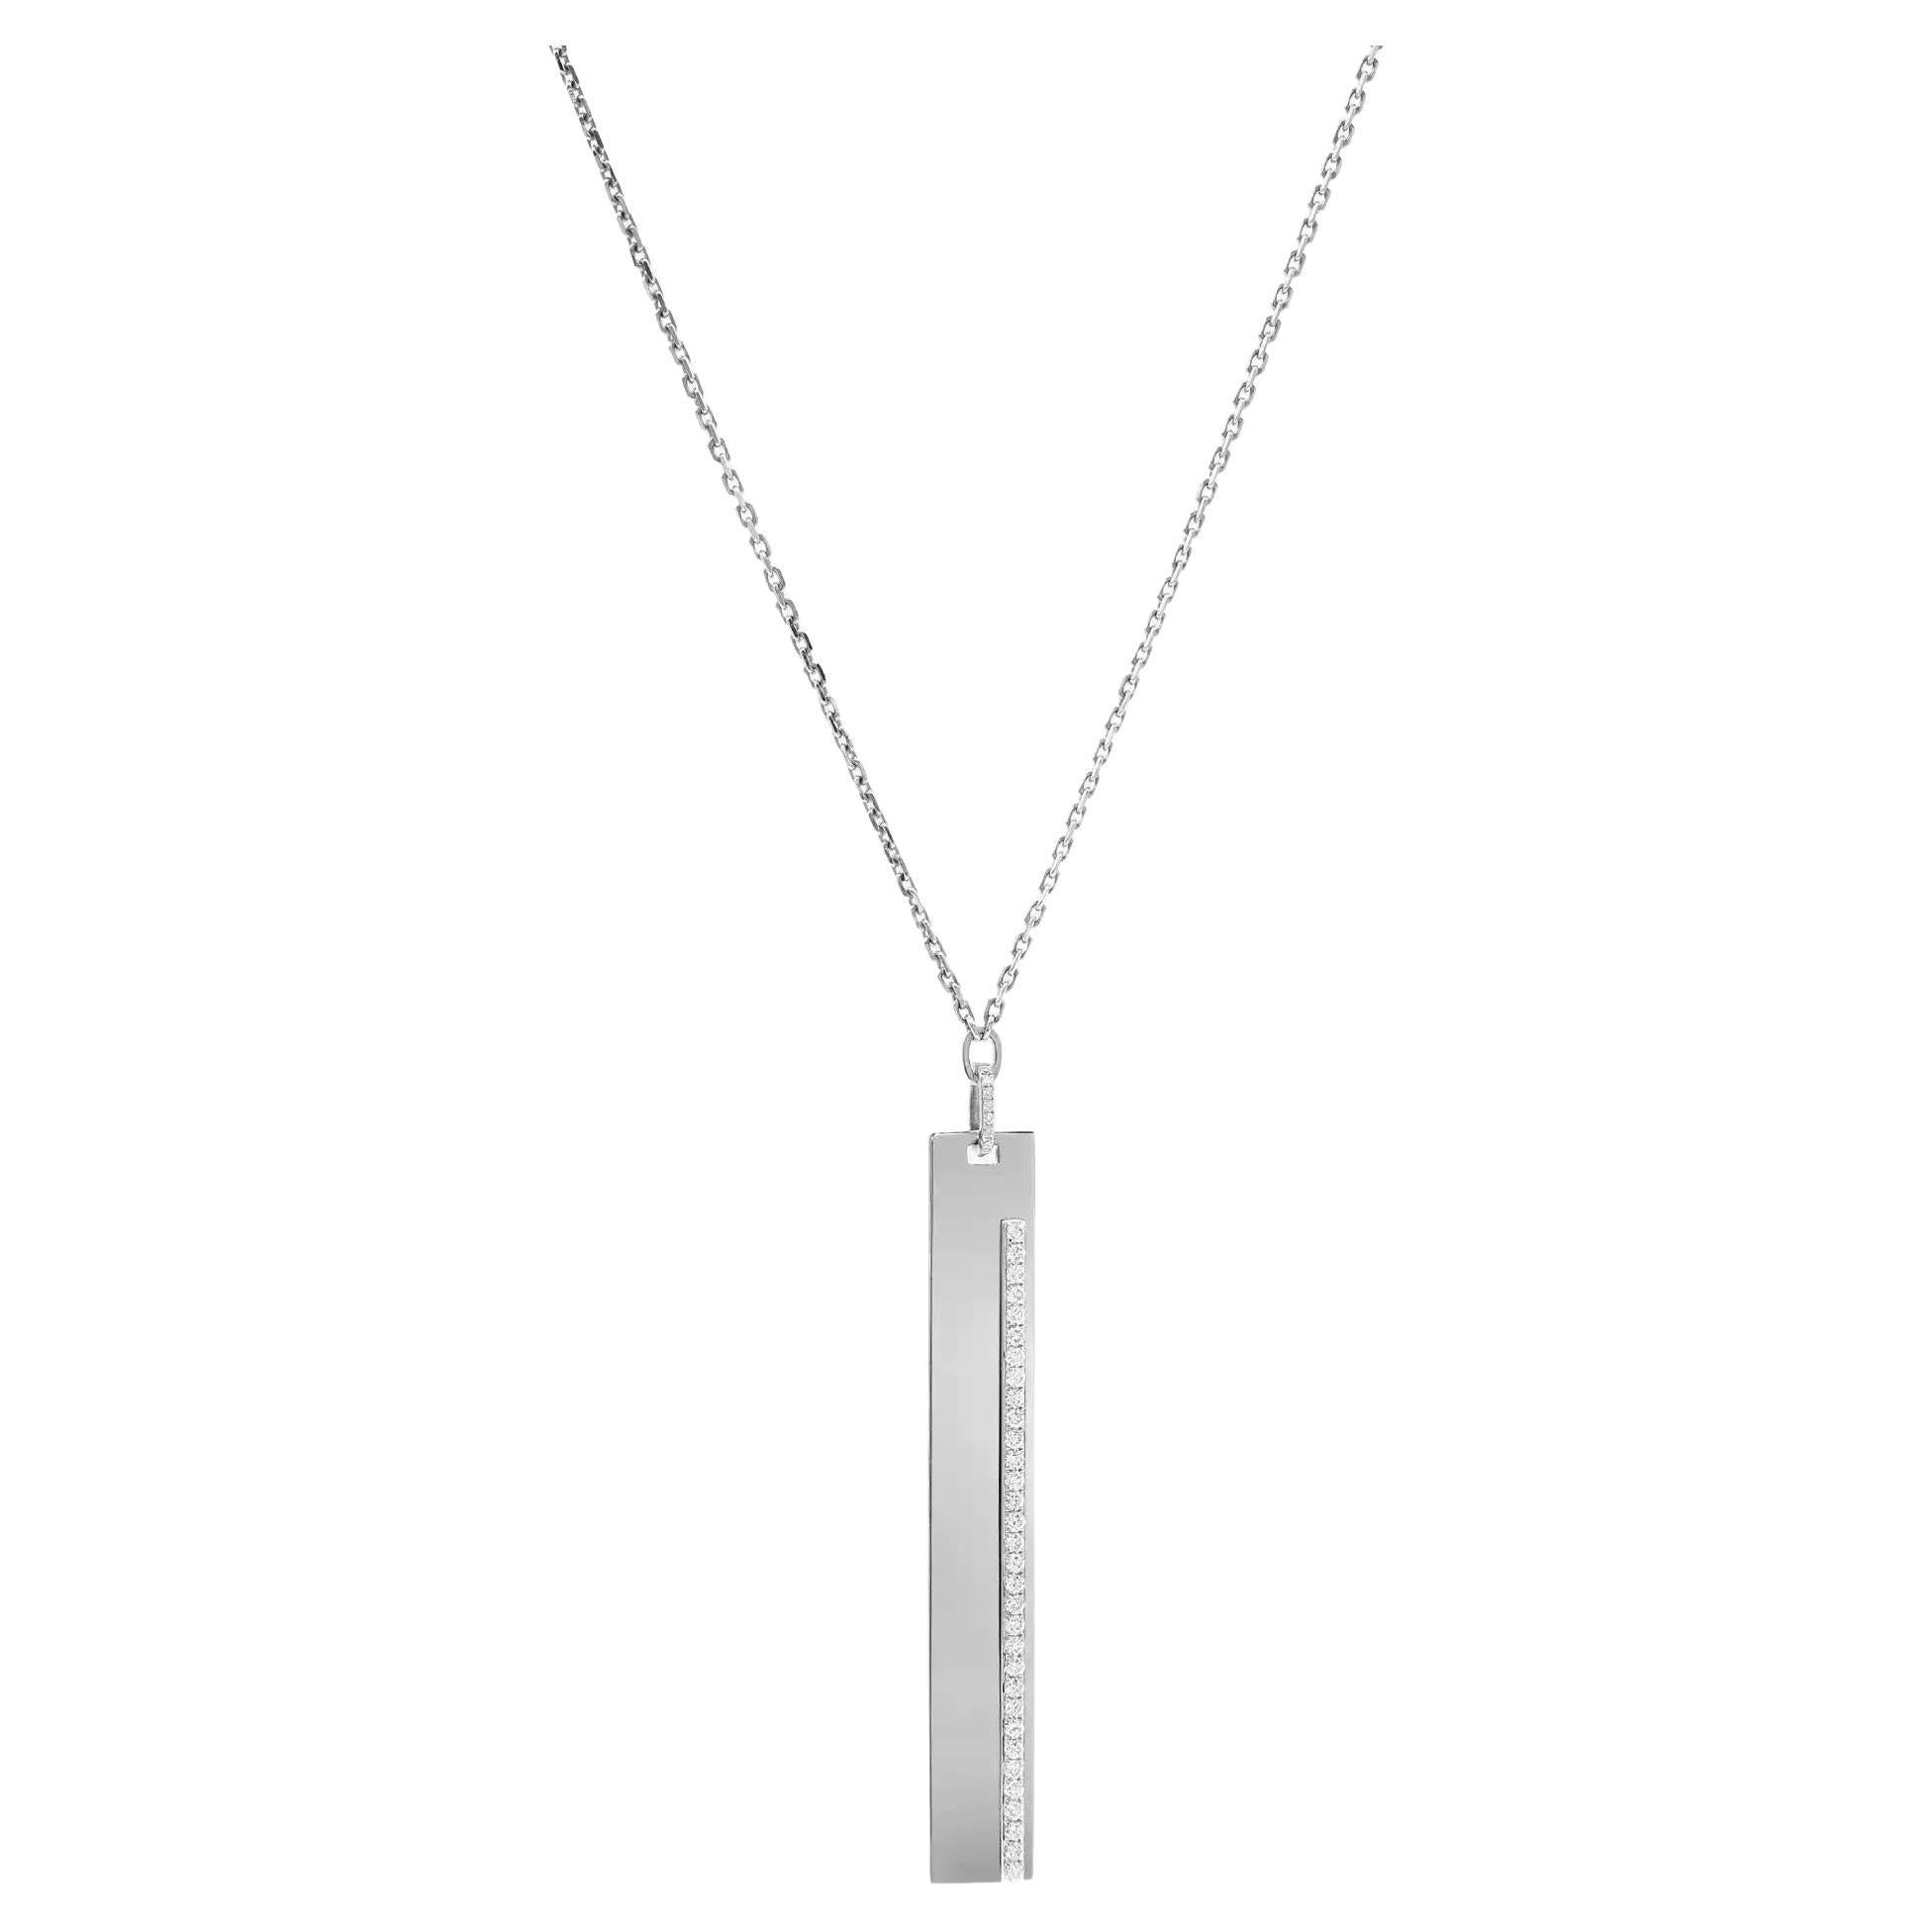 Messika 0.59Ctw Sautoir Kate Diamond Bar pendant Necklace 18K White Gold 29.5 in For Sale